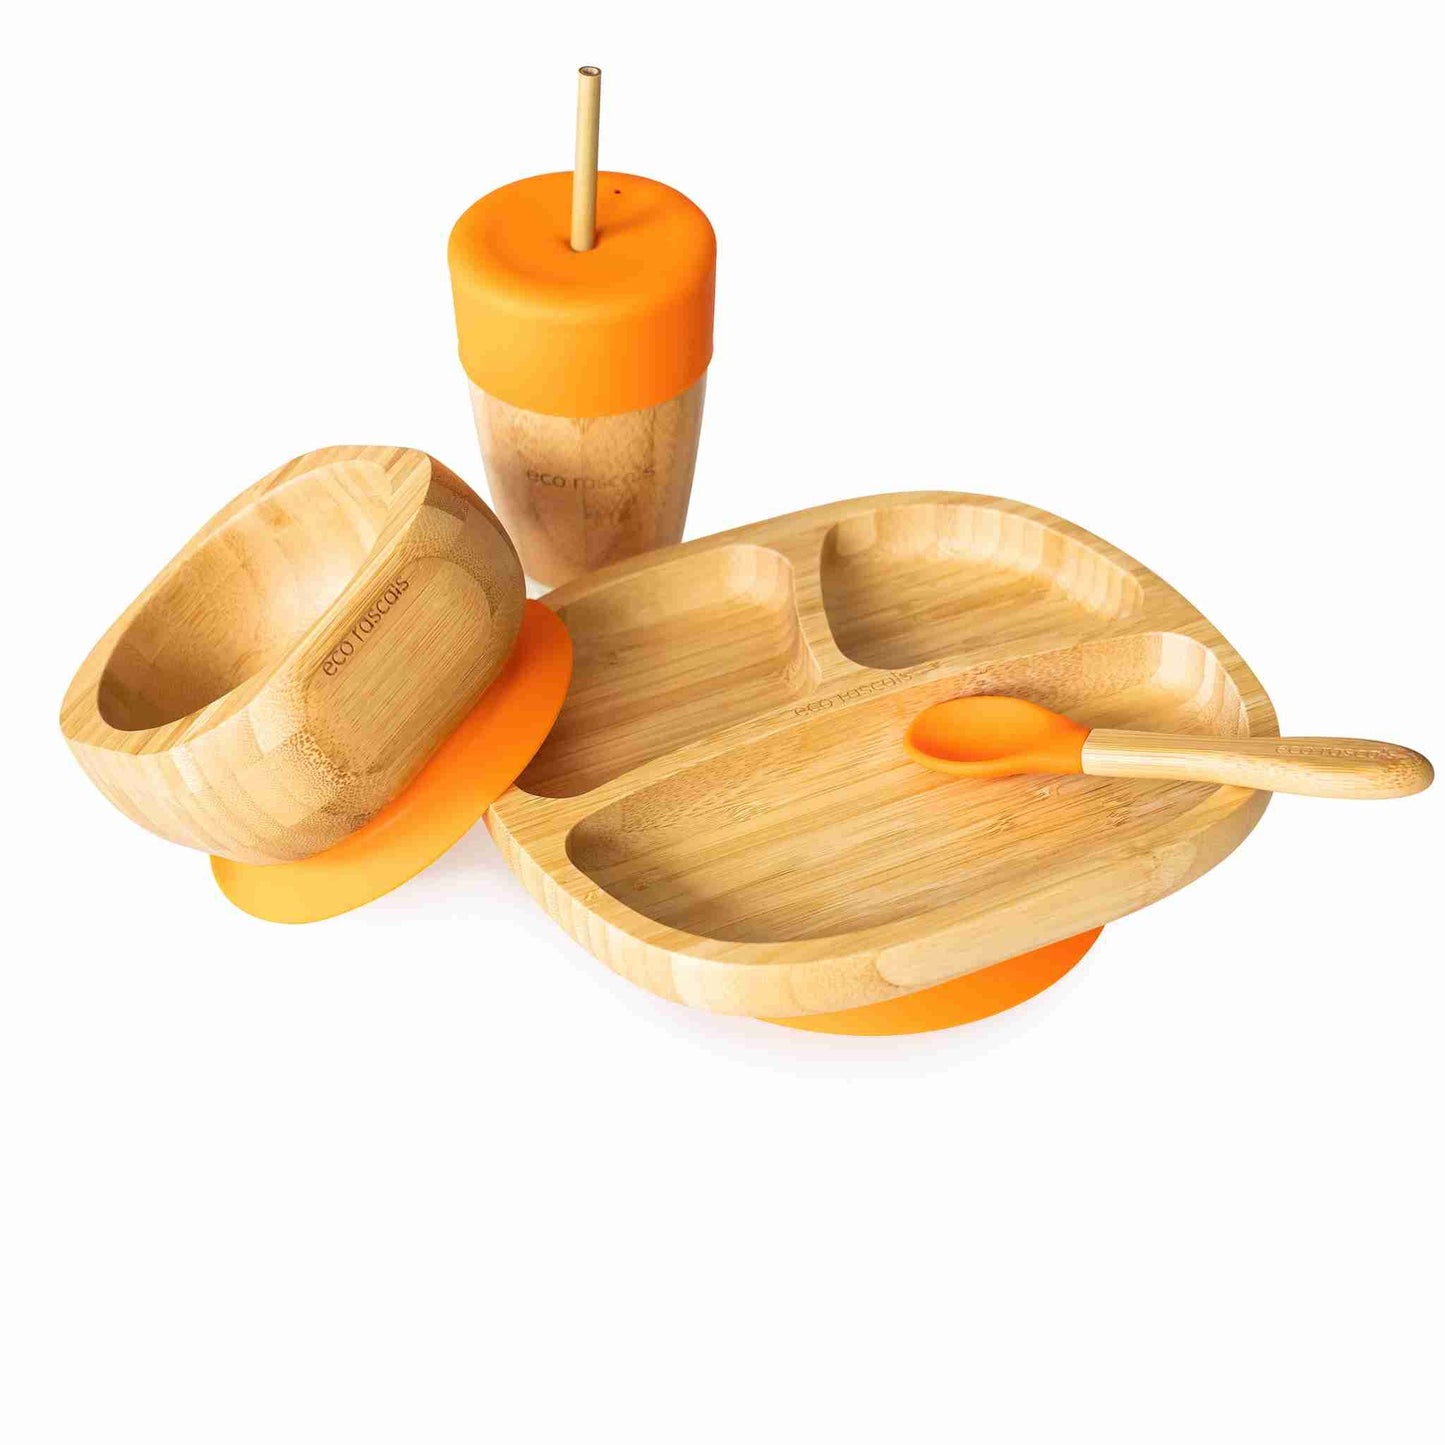 Eco Rascals Bamboo Classic Section Plate Gift Set